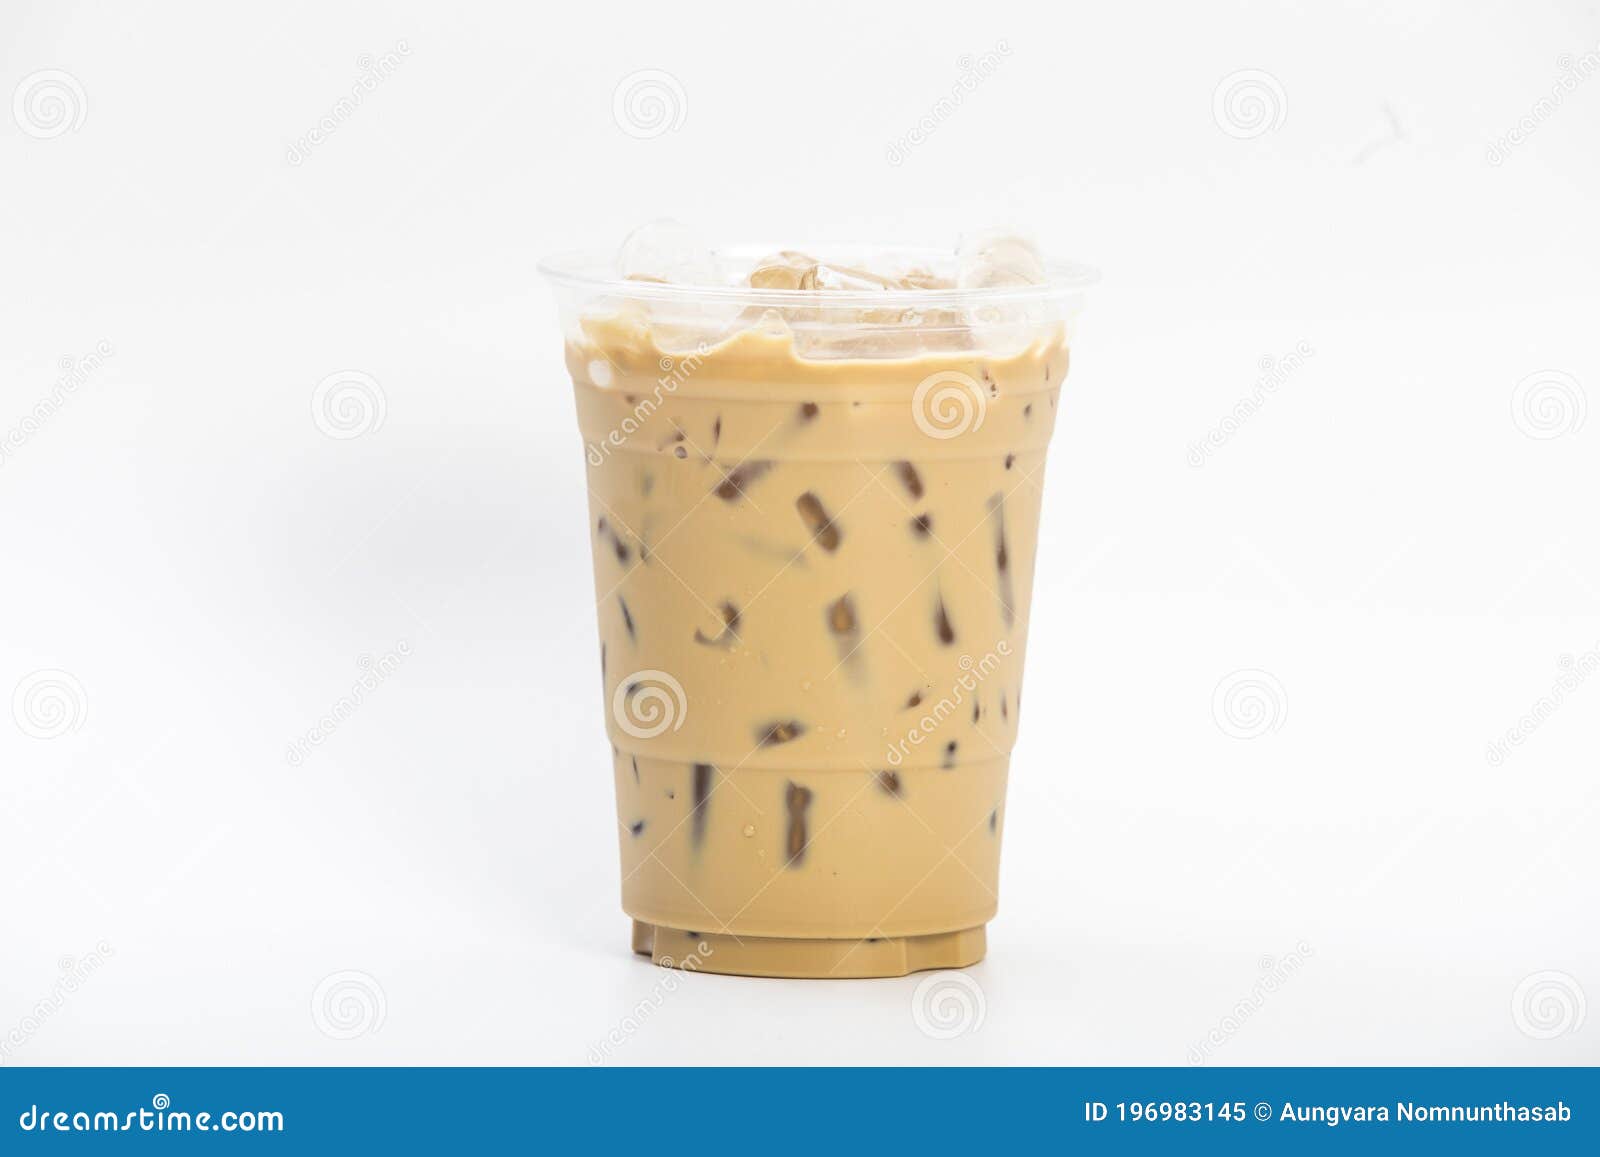 https://thumbs.dreamstime.com/z/cold-brew-iced-coffee-espresso-iced-latte-takeaway-clear-plastic-glass-oz-isolated-white-background-cool-iced-espresso-196983145.jpg